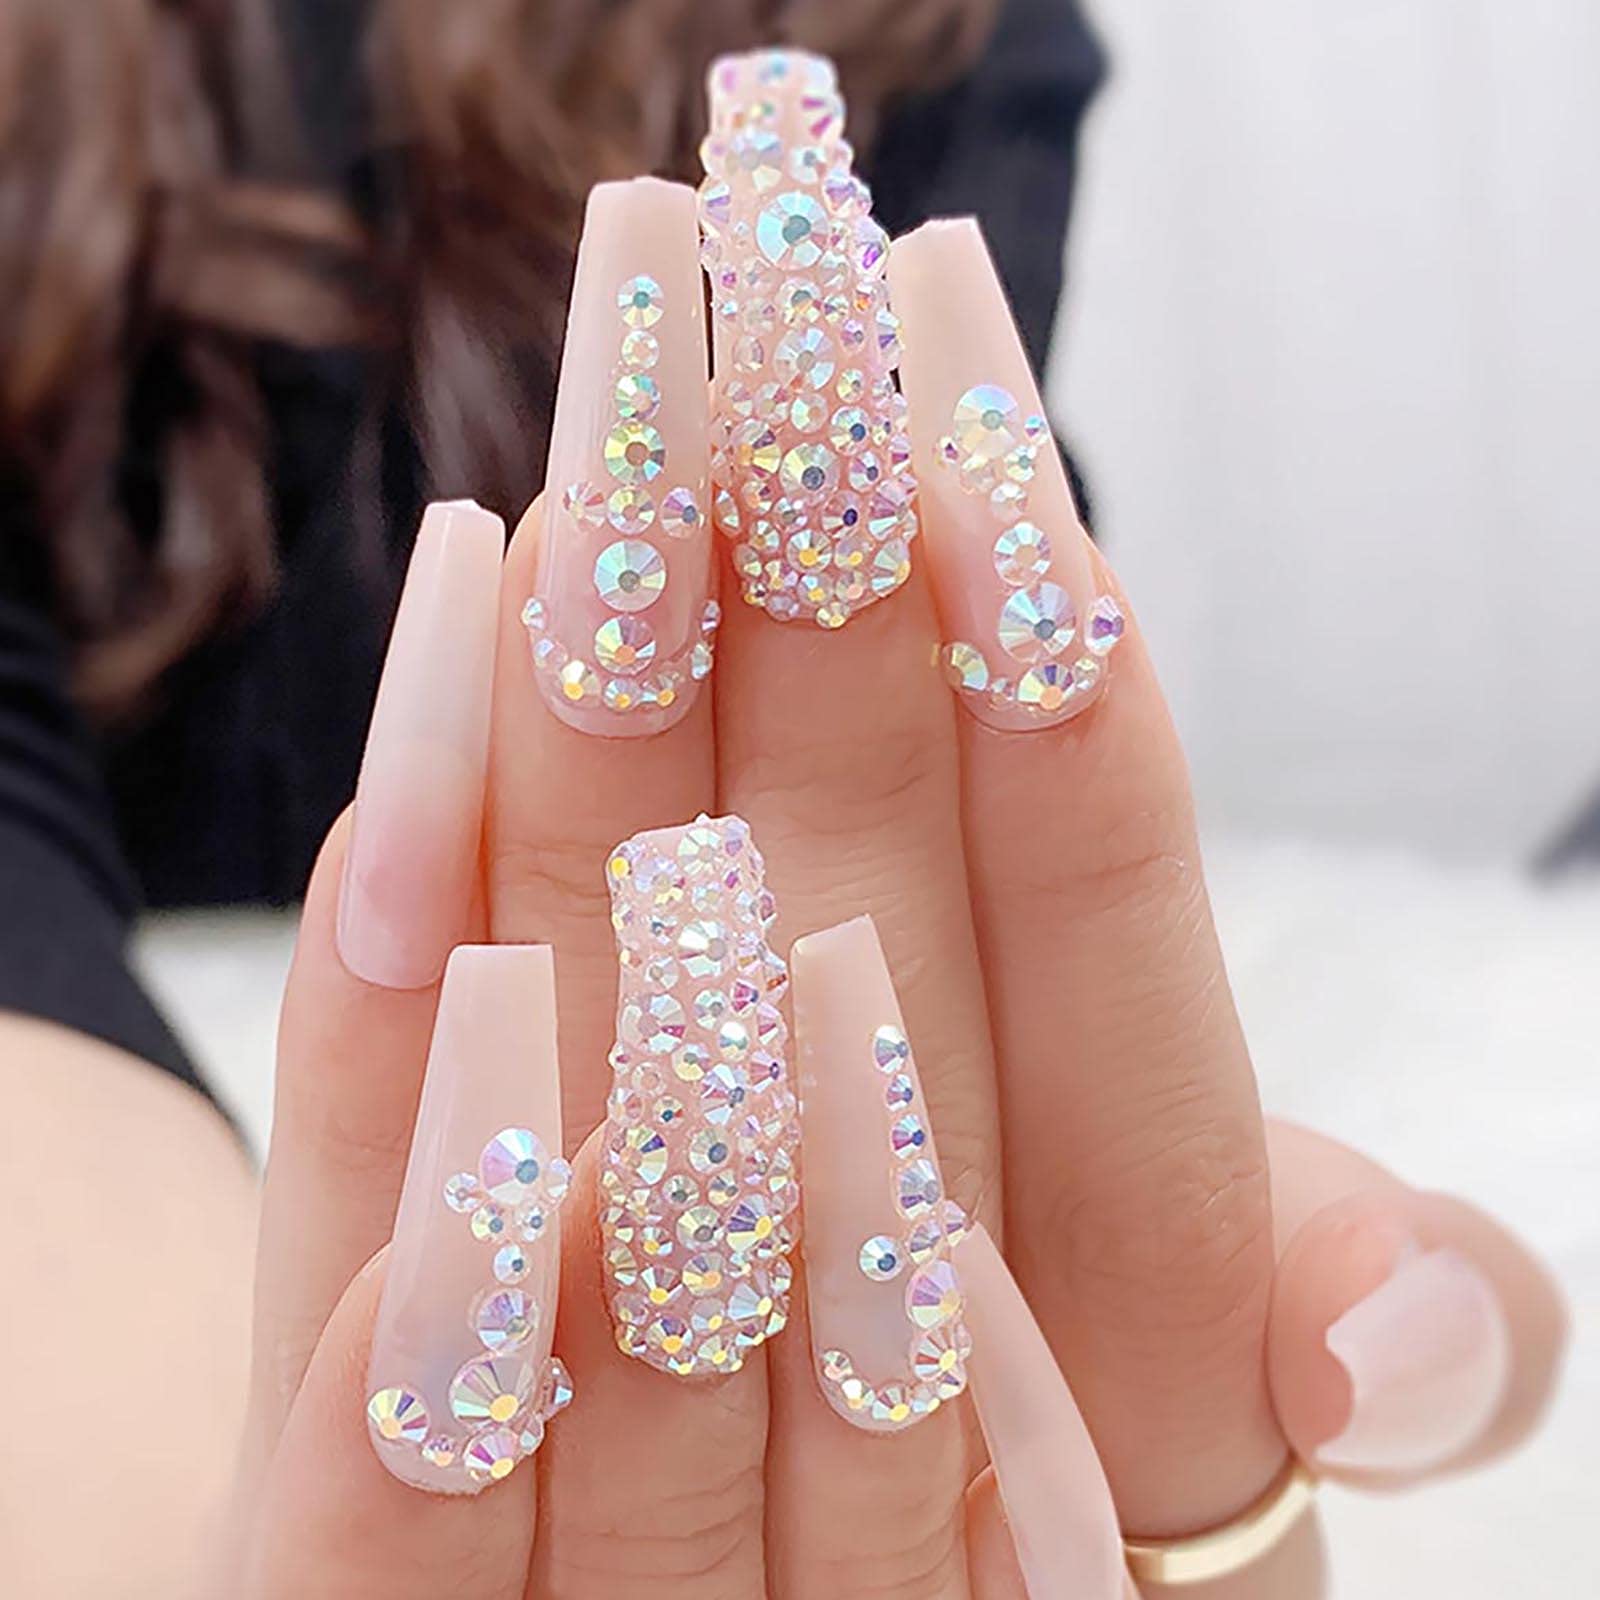 Florry Coffin Extra Long Press on Nails with Rhinestones Pink Fake